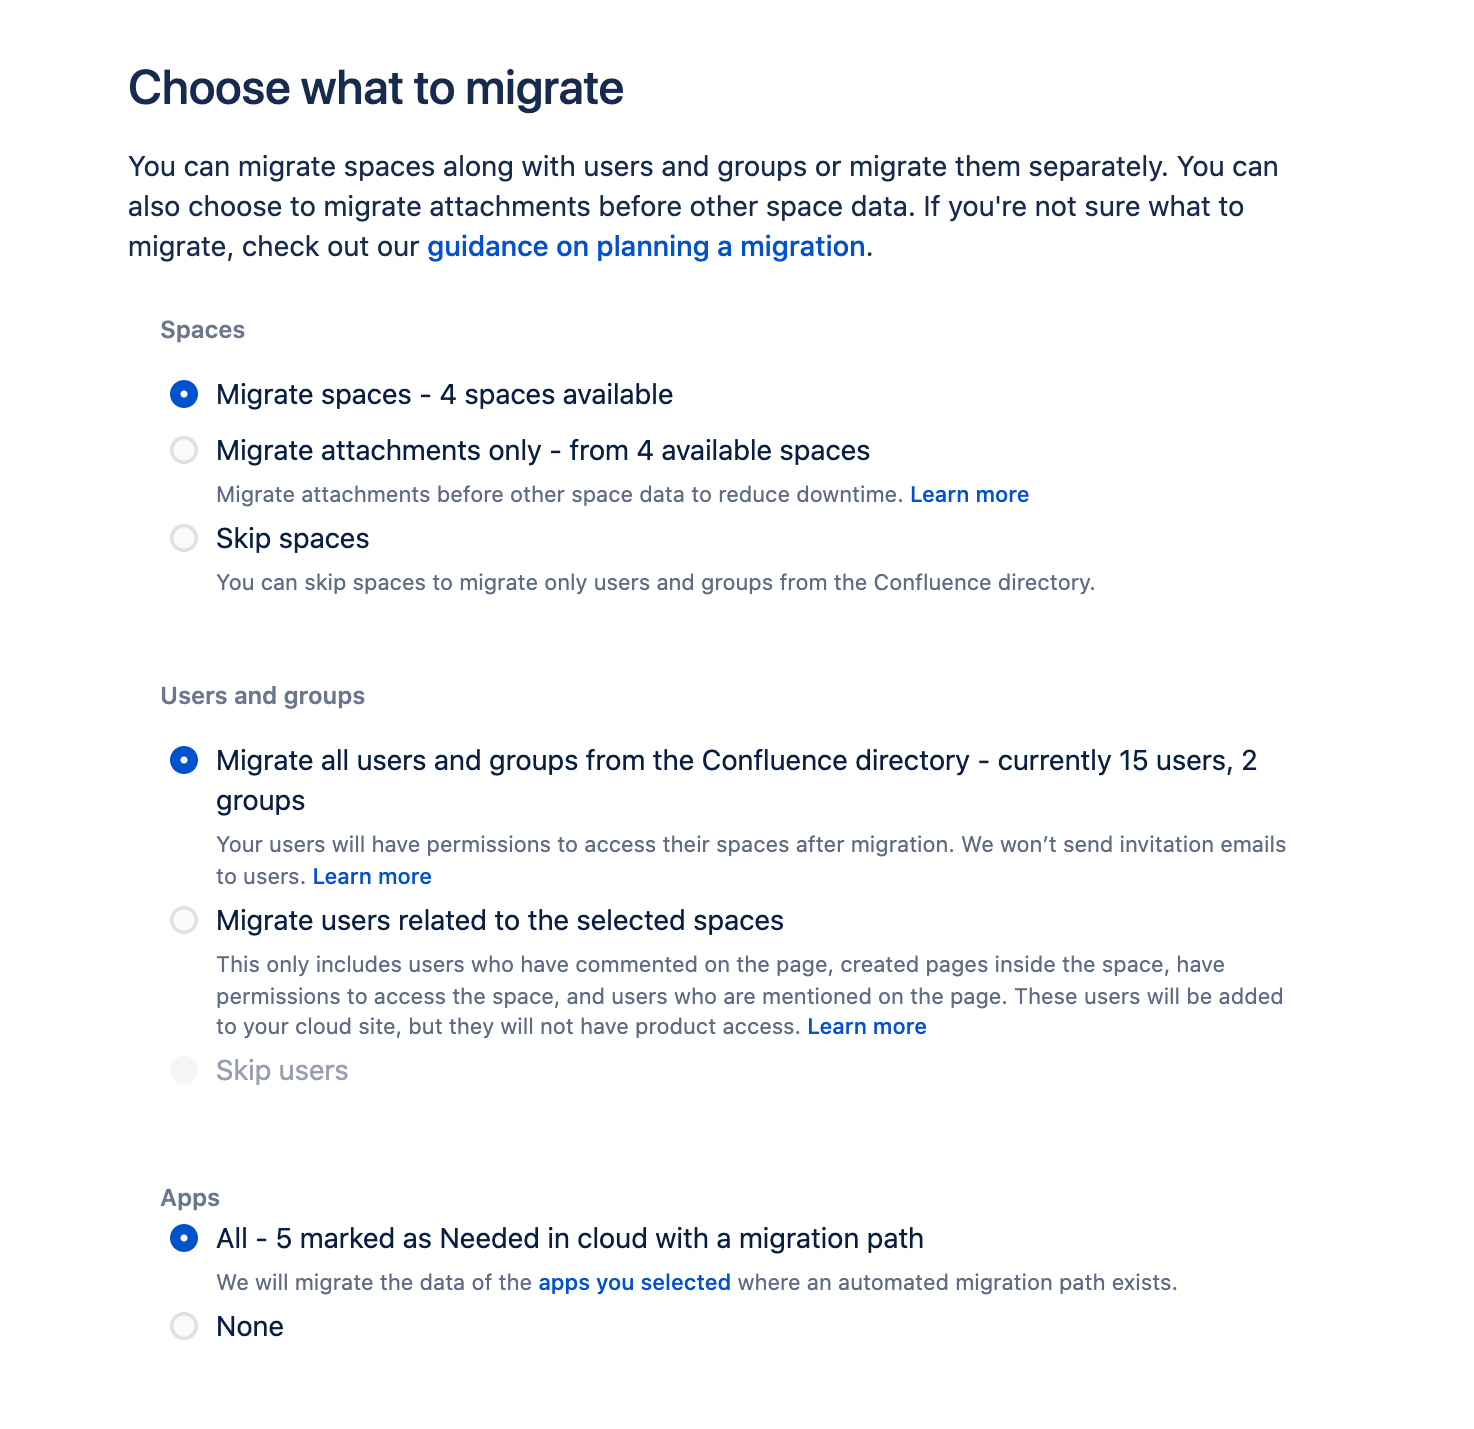 Data that can be added to your Confluence migration plan, for example spaces.